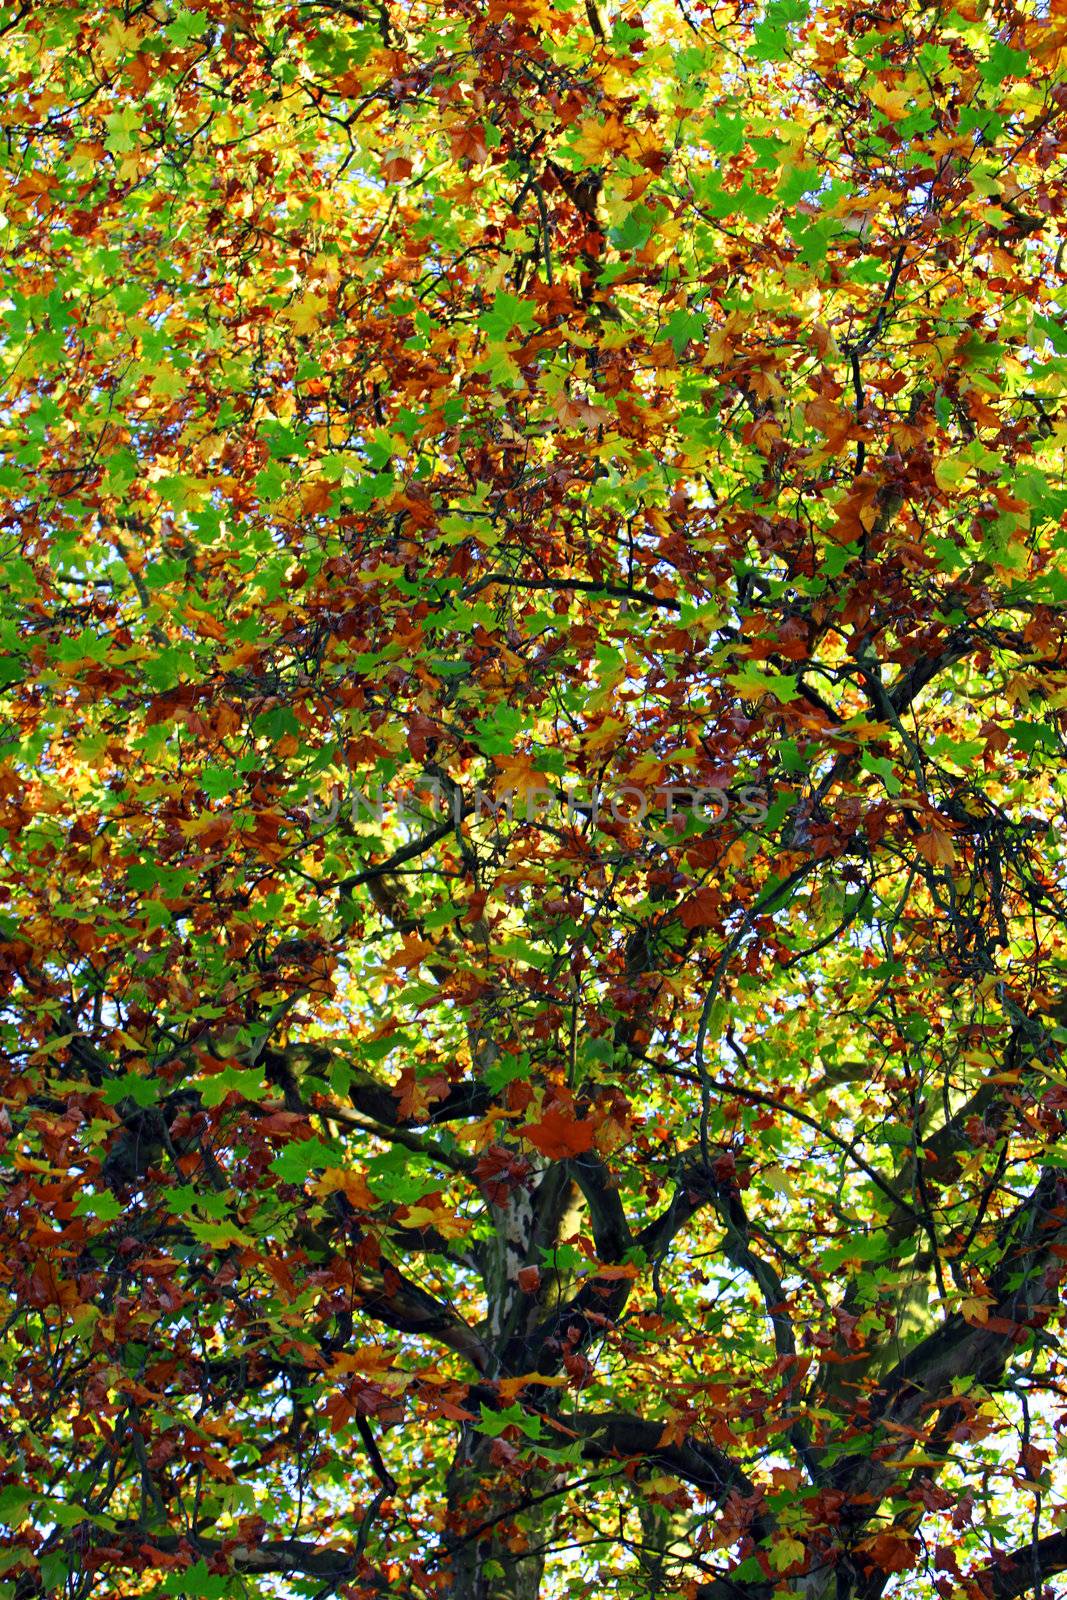 View up into the canopy of a deciuous tree showing the changing colours of the leaves to yellow and brown during the autumn season